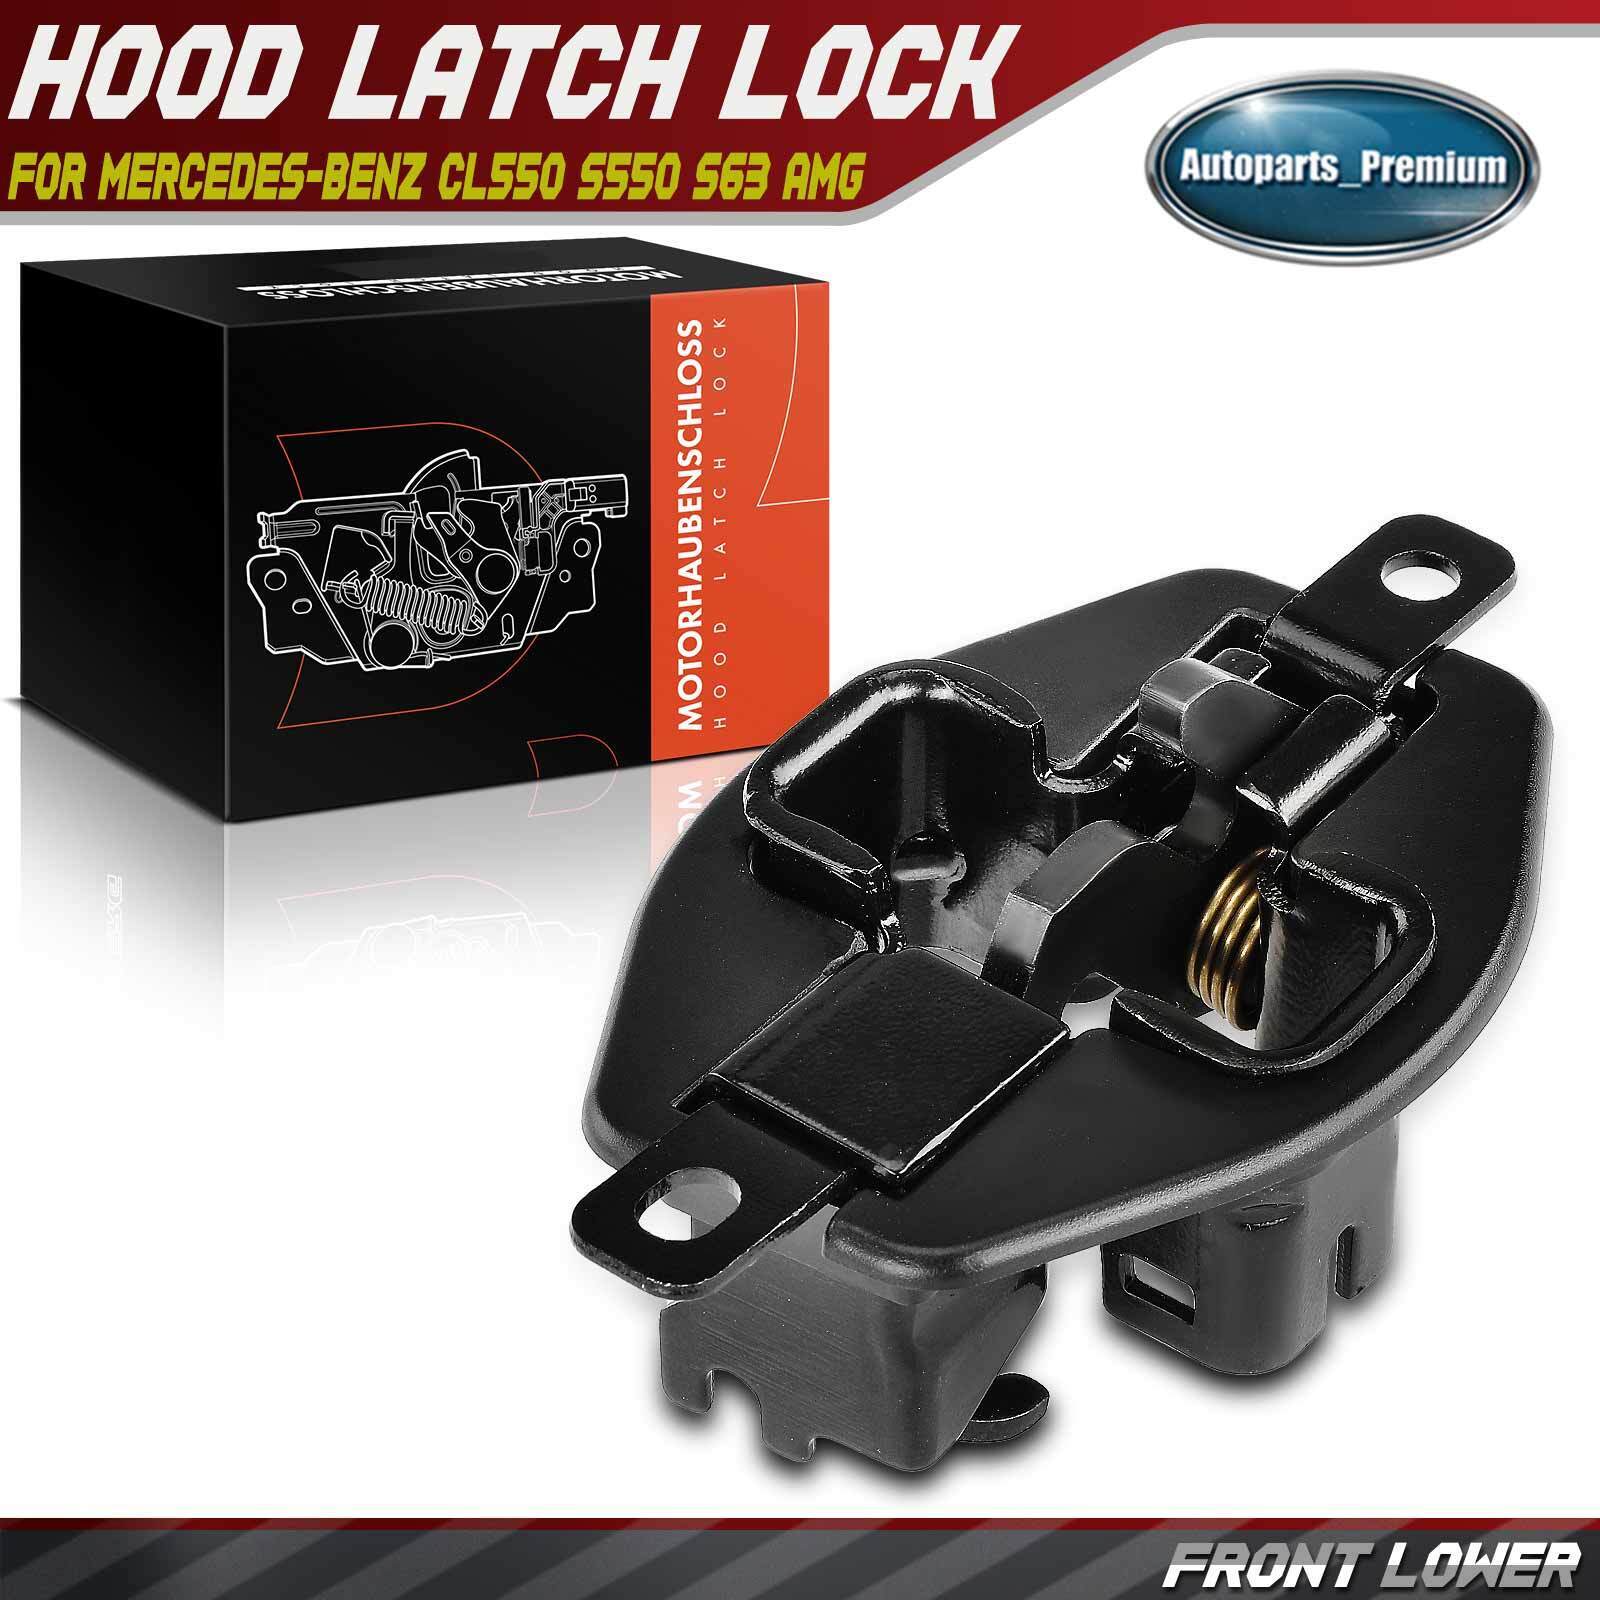 New Front Lower Hood Latch Lock for Mercedes-Benz CL550 CL600 S350 S550 S63 AMG